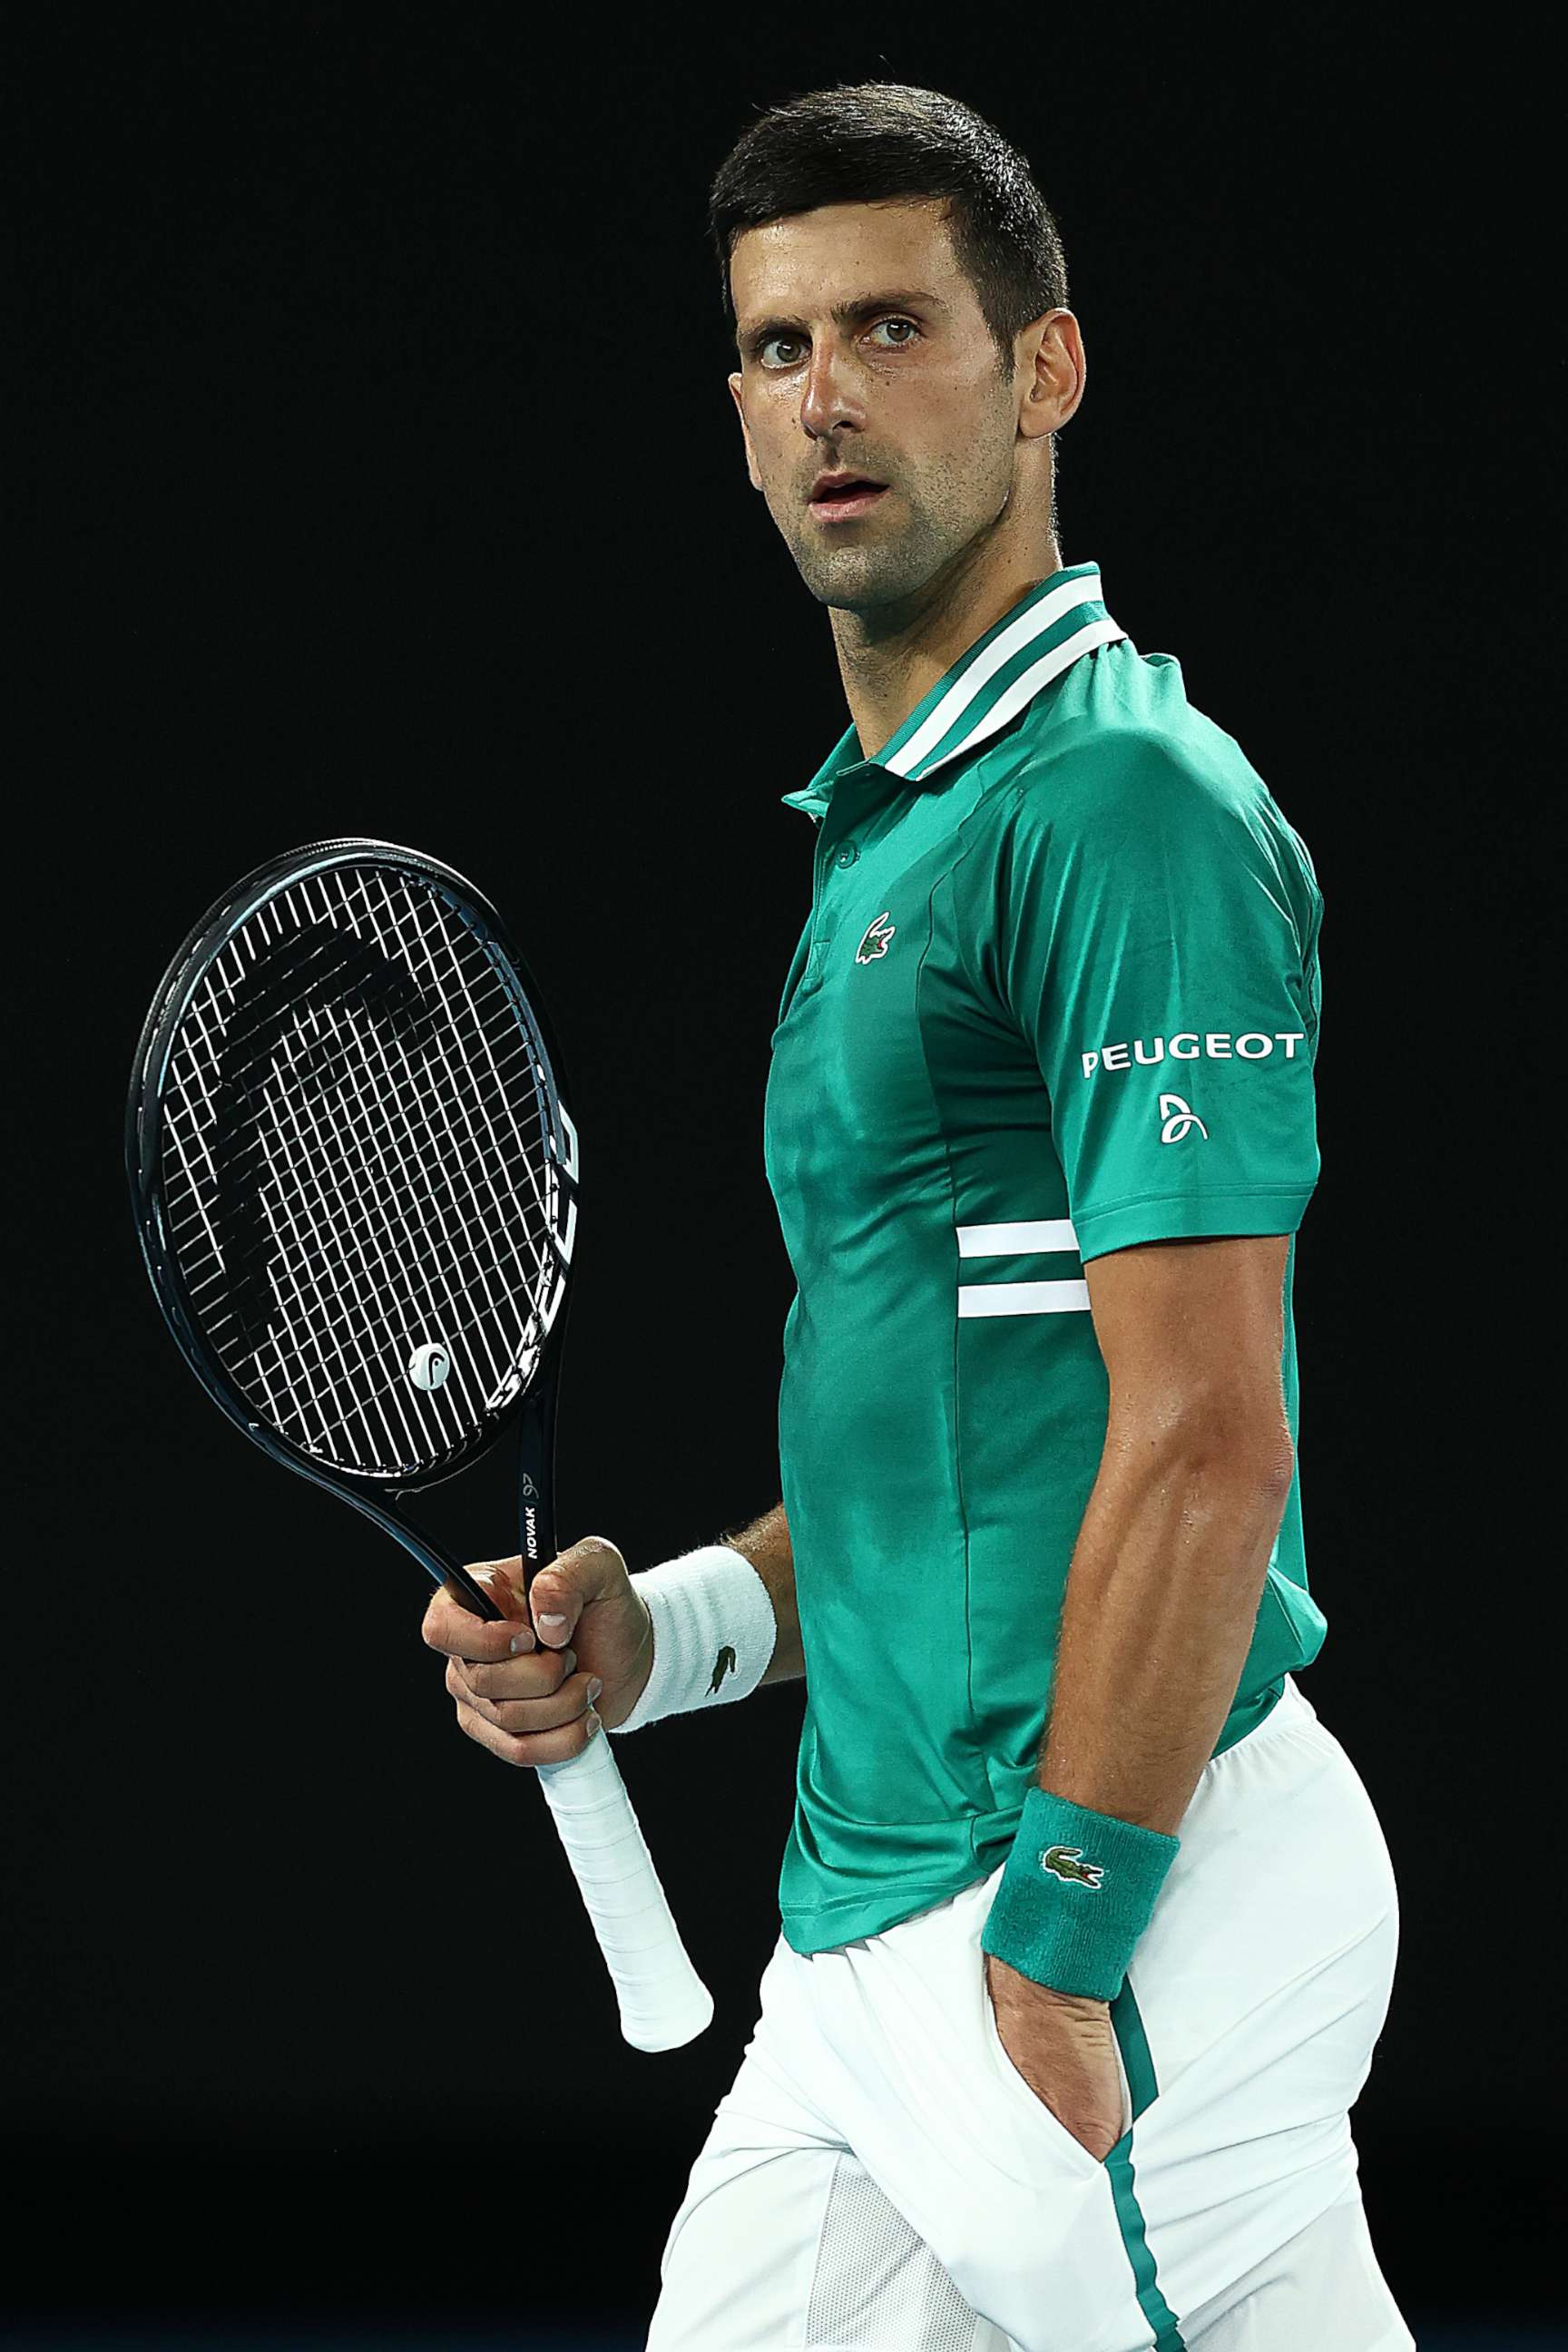 PHOTO: Novak Djokovic of Serbia celebrates after winning a point in his Men's Singles Quarterfinals match against Alexander Zverev of Germany during the 2021 Australian Open at Melbourne Park on Feb. 16, 2021, in Melbourne, Australia.